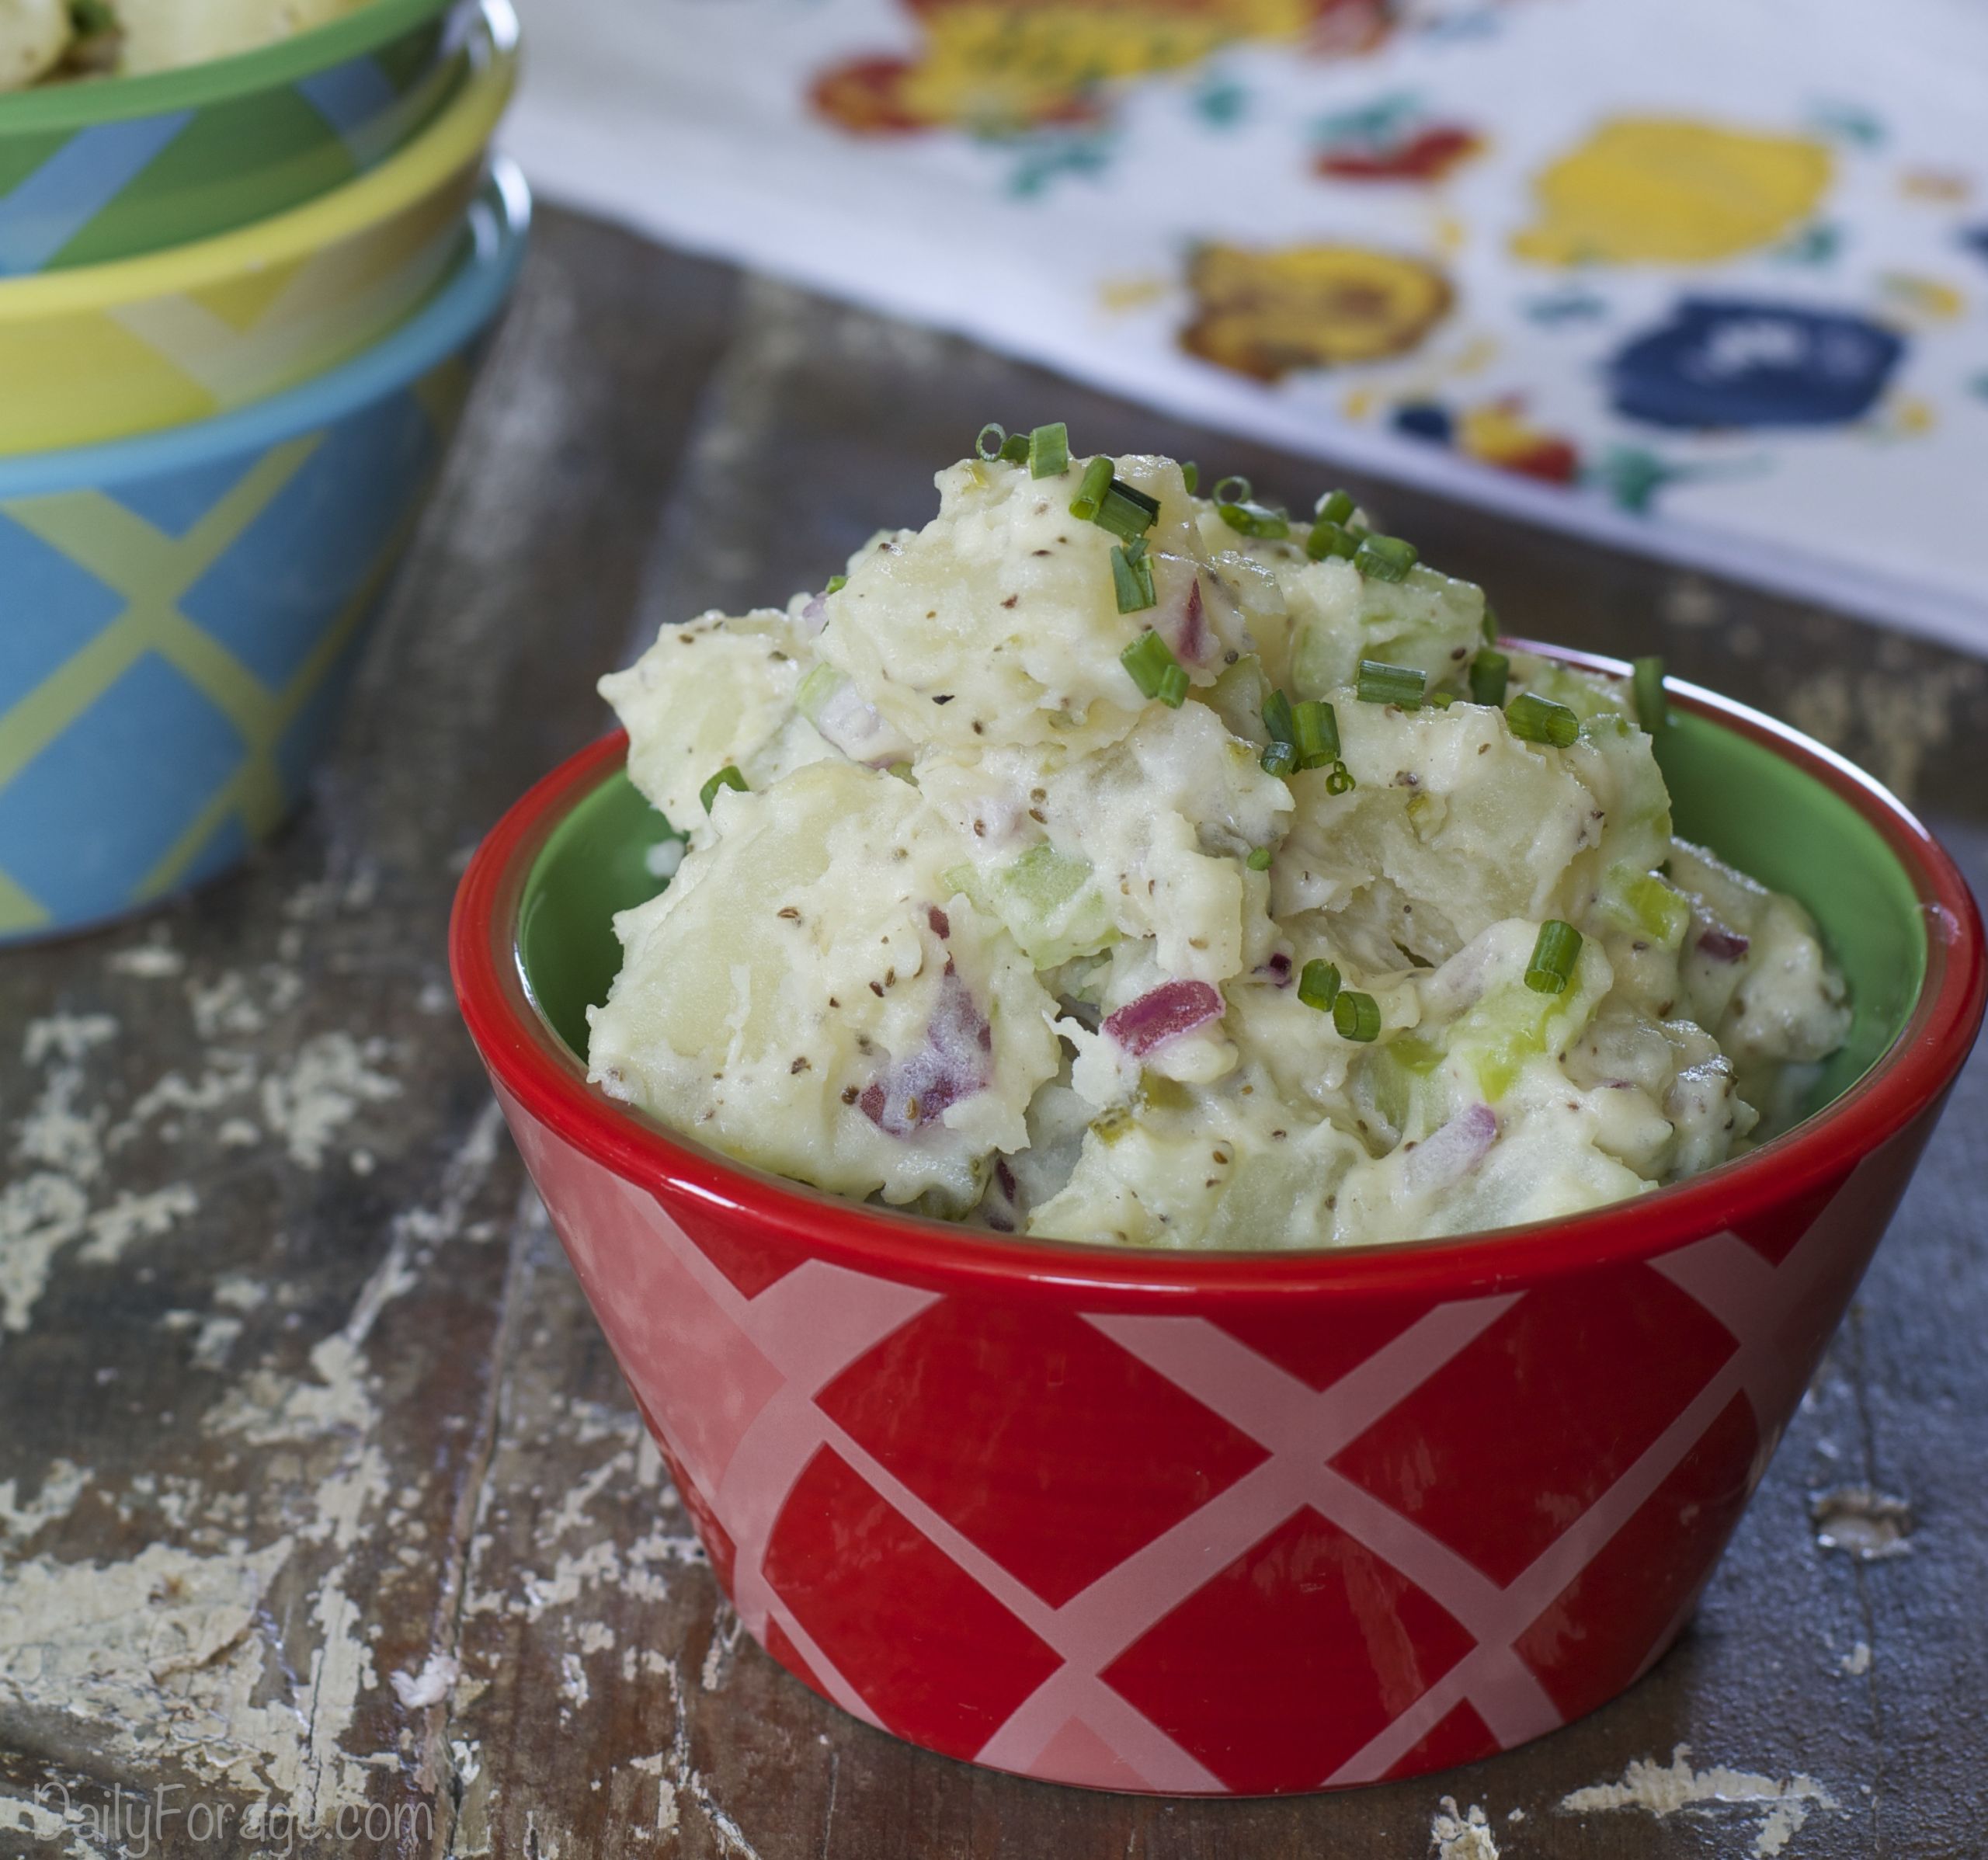 Don’t Miss Our 15 Most Shared Gluten Free Potato Salad